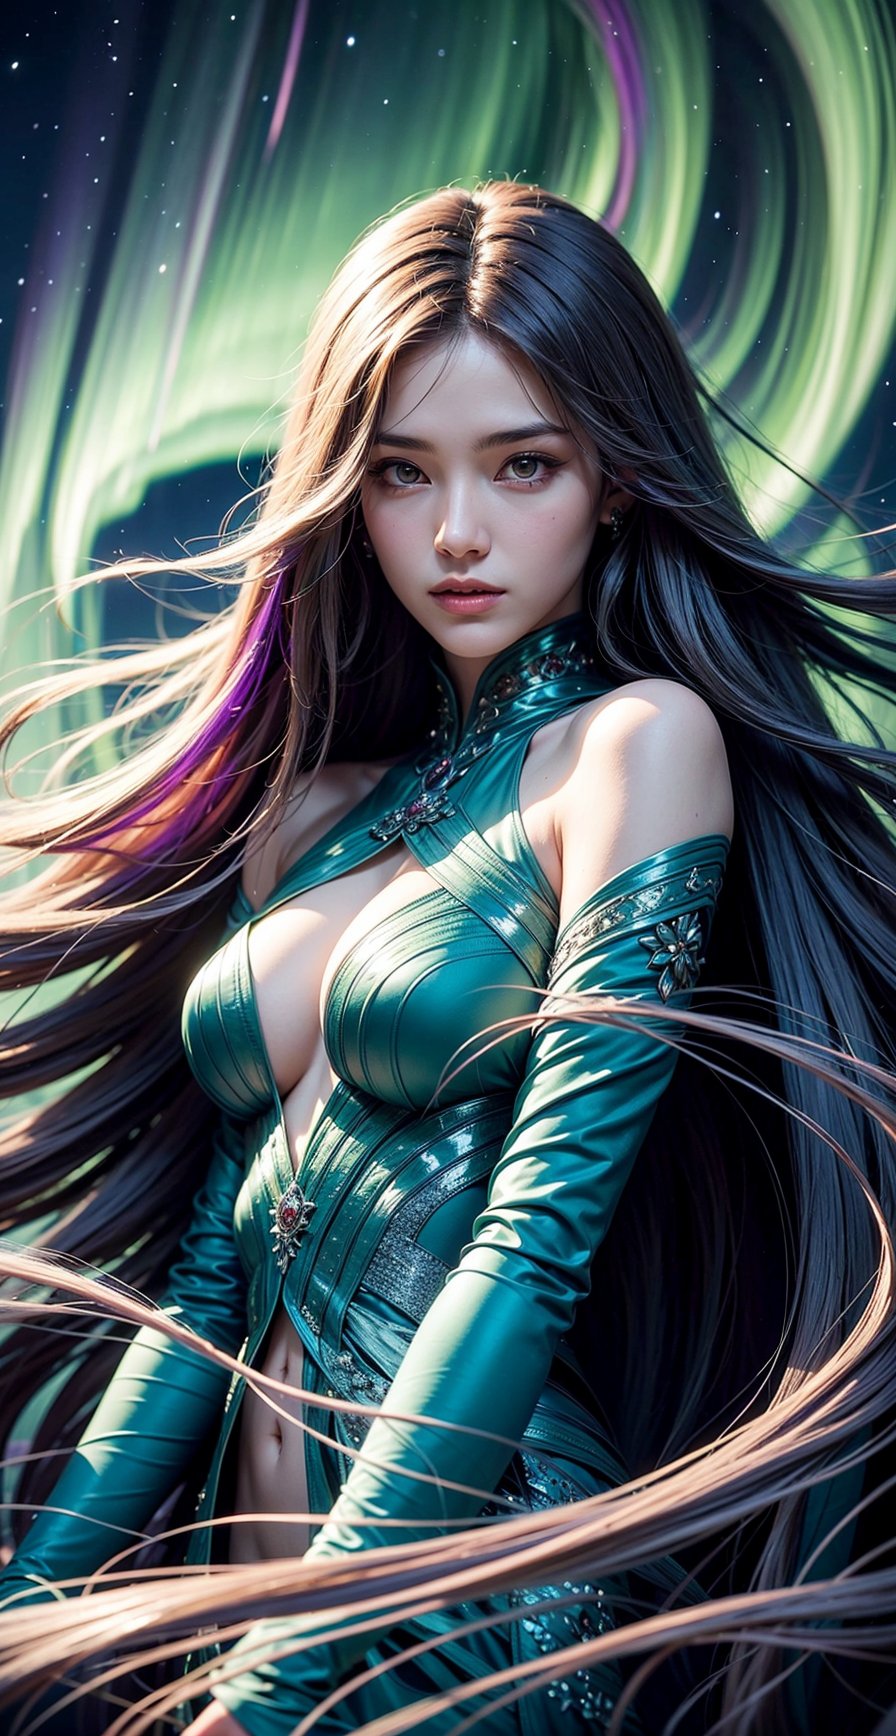 a female character with long, flowing hair that appears to be made of ethereal, swirling patterns resembling the Northern Lights or Aurora Borealis. The background is dominated by deep blues and purples, creating a mysterious and dramatic atmosphere. The character's face is serene, with pale skin and striking features. She wears a dark-colored outfit with subtle patterns. The overall style of the artwork is reminiscent of fantasy or supernatural genres